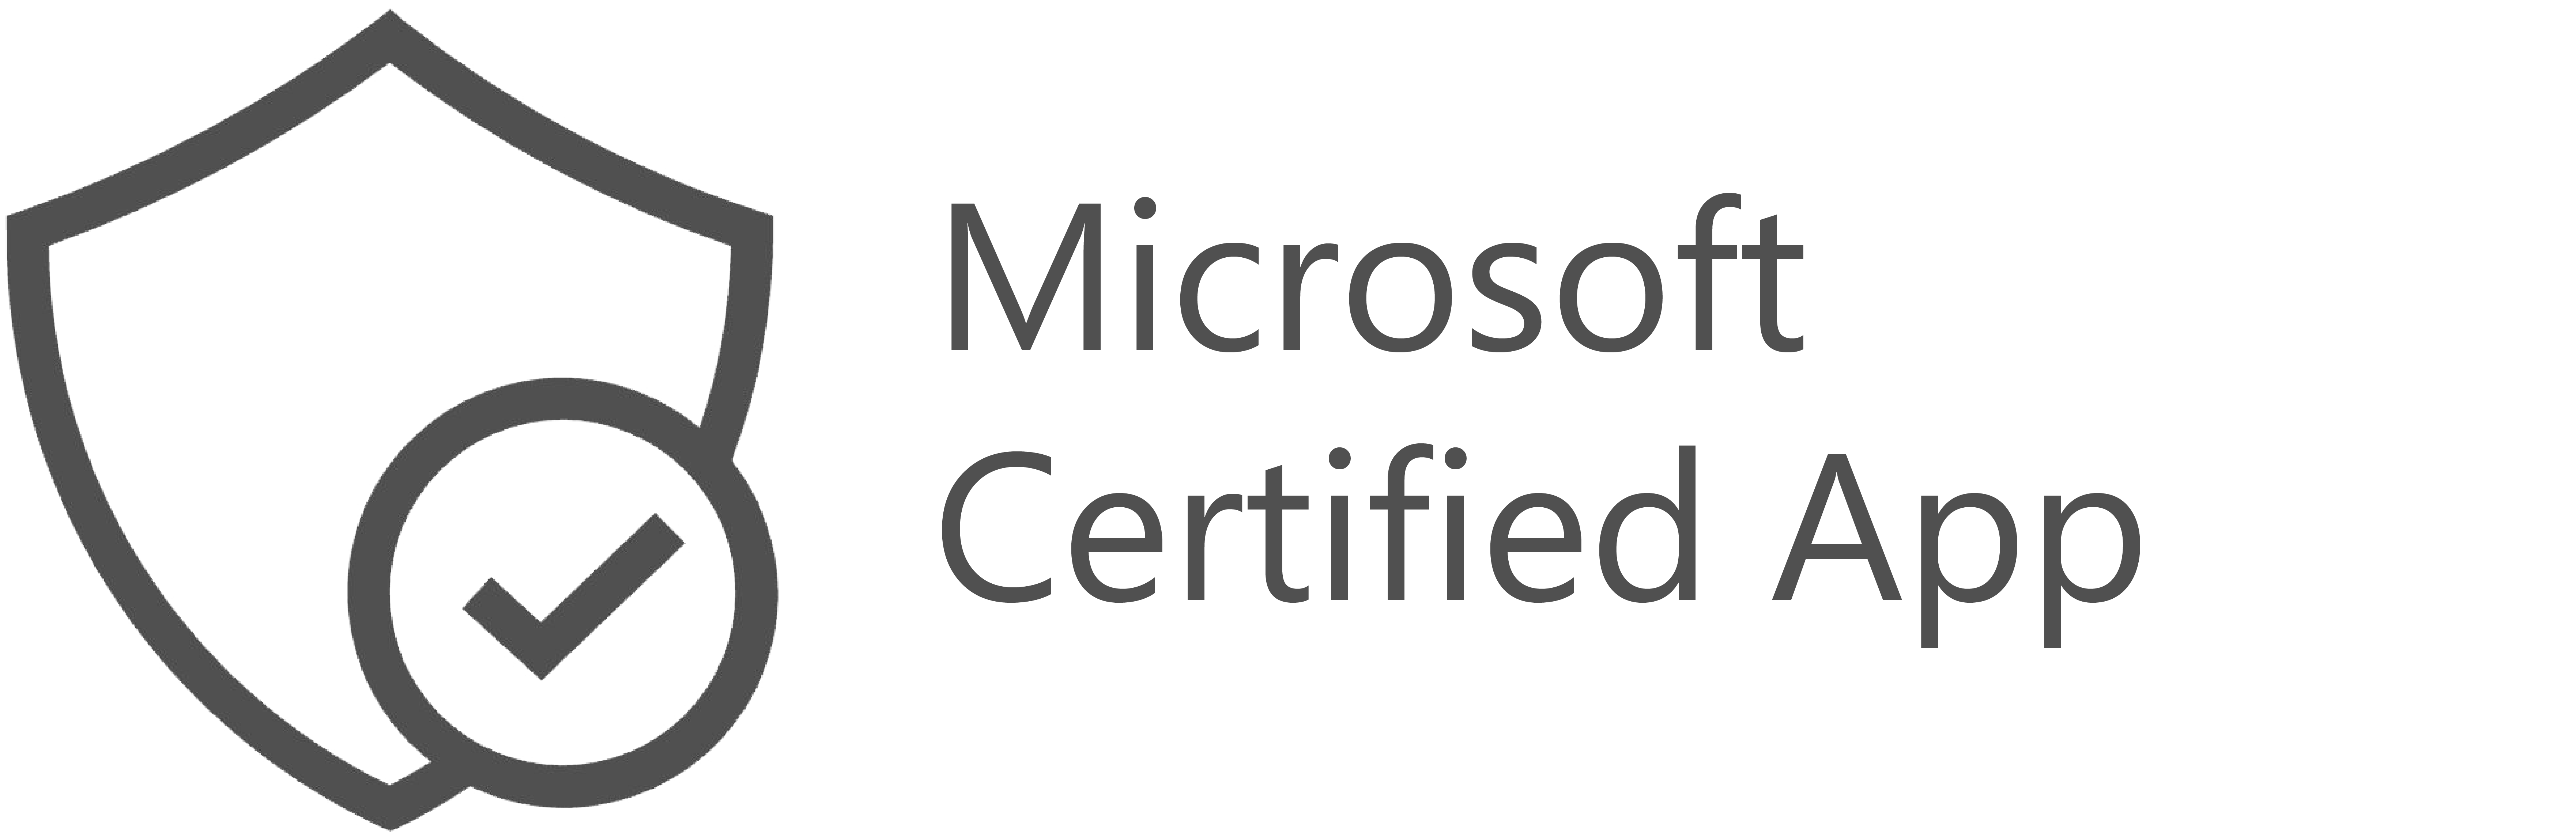 LMS365 Named as a Microsoft 365 Certified App